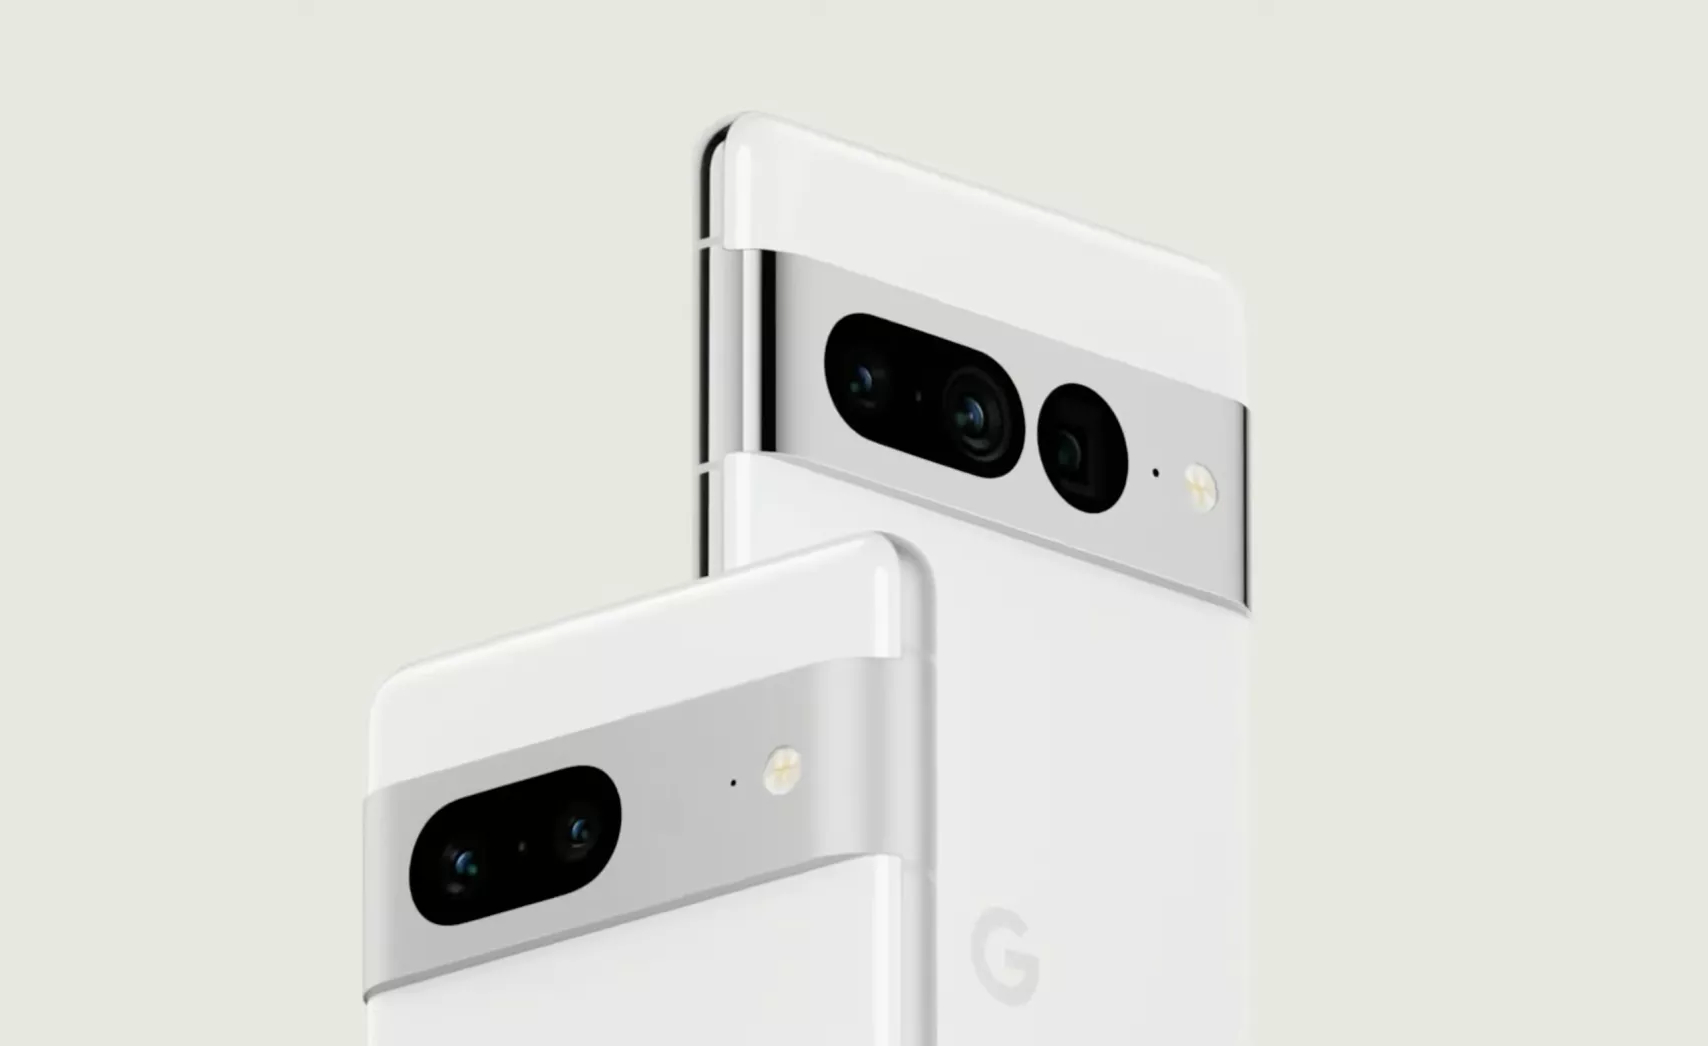 Google Tensor G2: Performance details for Pixel 7 and Pixel 7 Pro leak with significant GPU improvements